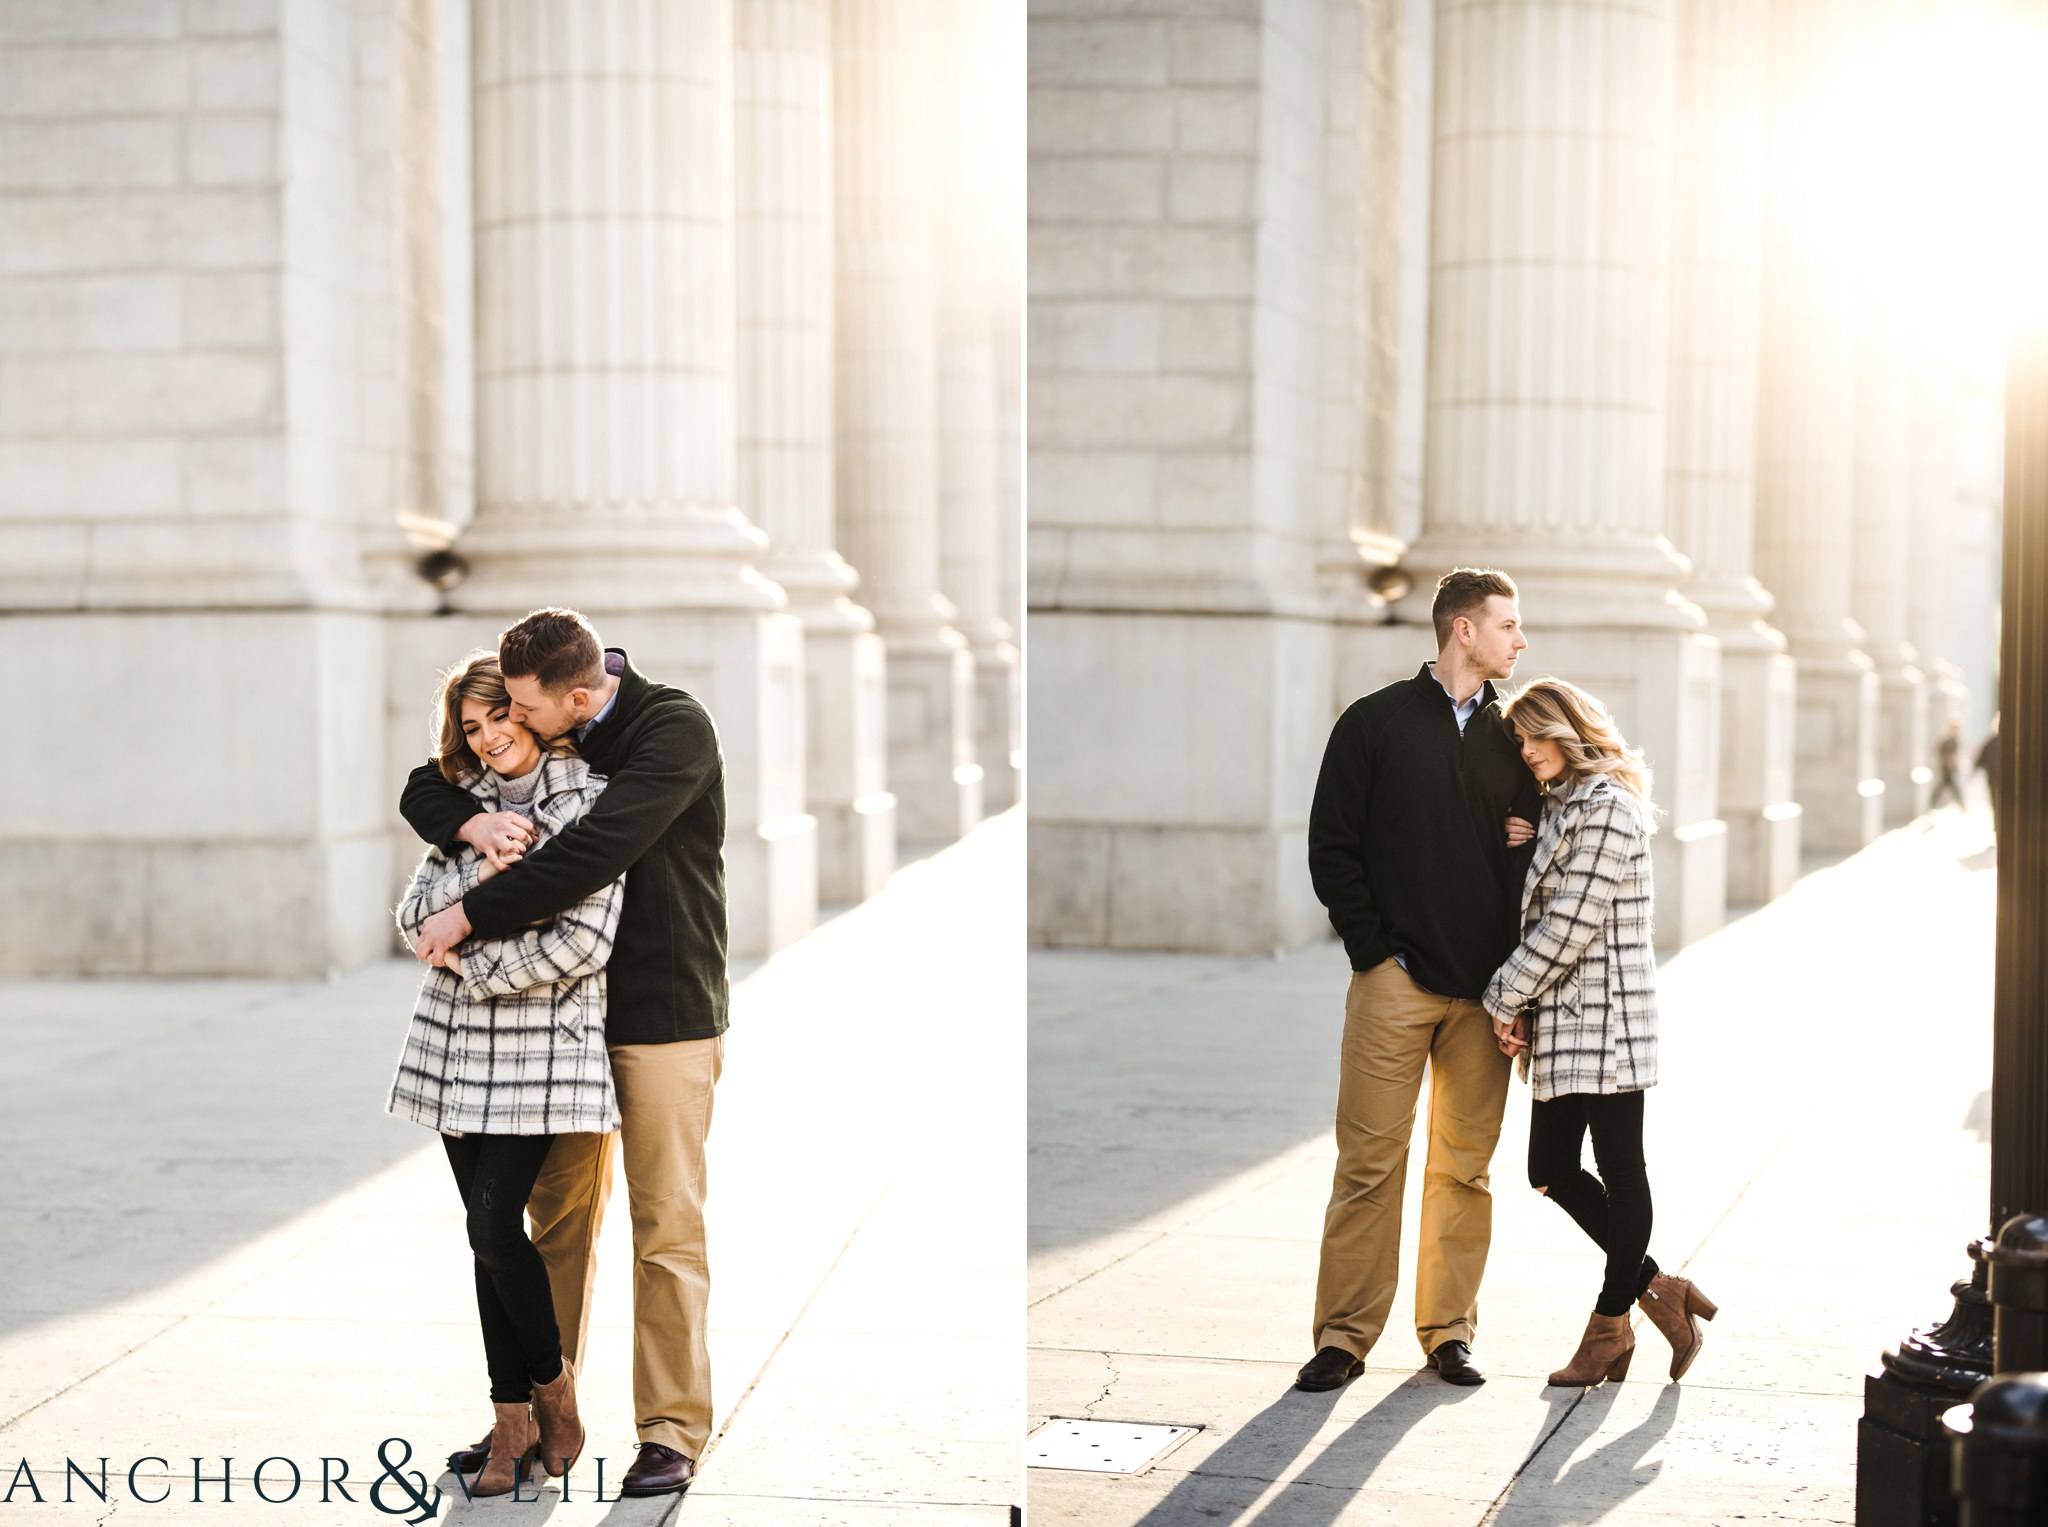 standing next to the pillars during their Scenic Washington DC Engagement Session